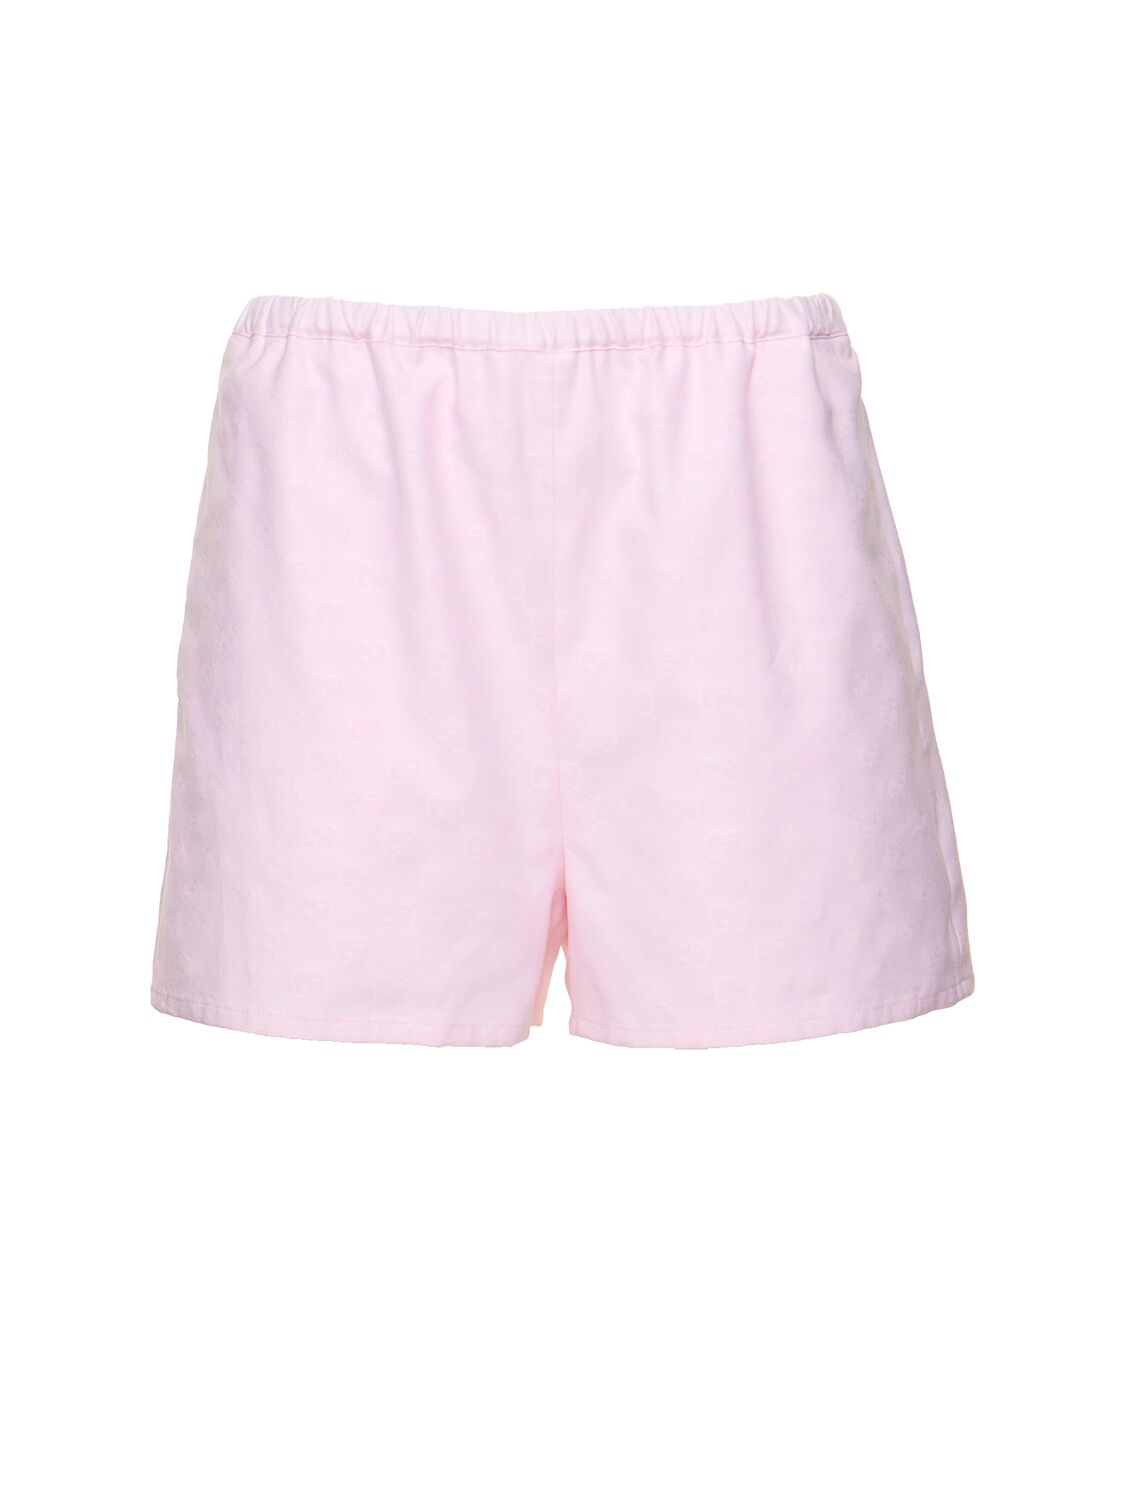 Gucci Gg Supreme Cotton Shorts In Pink